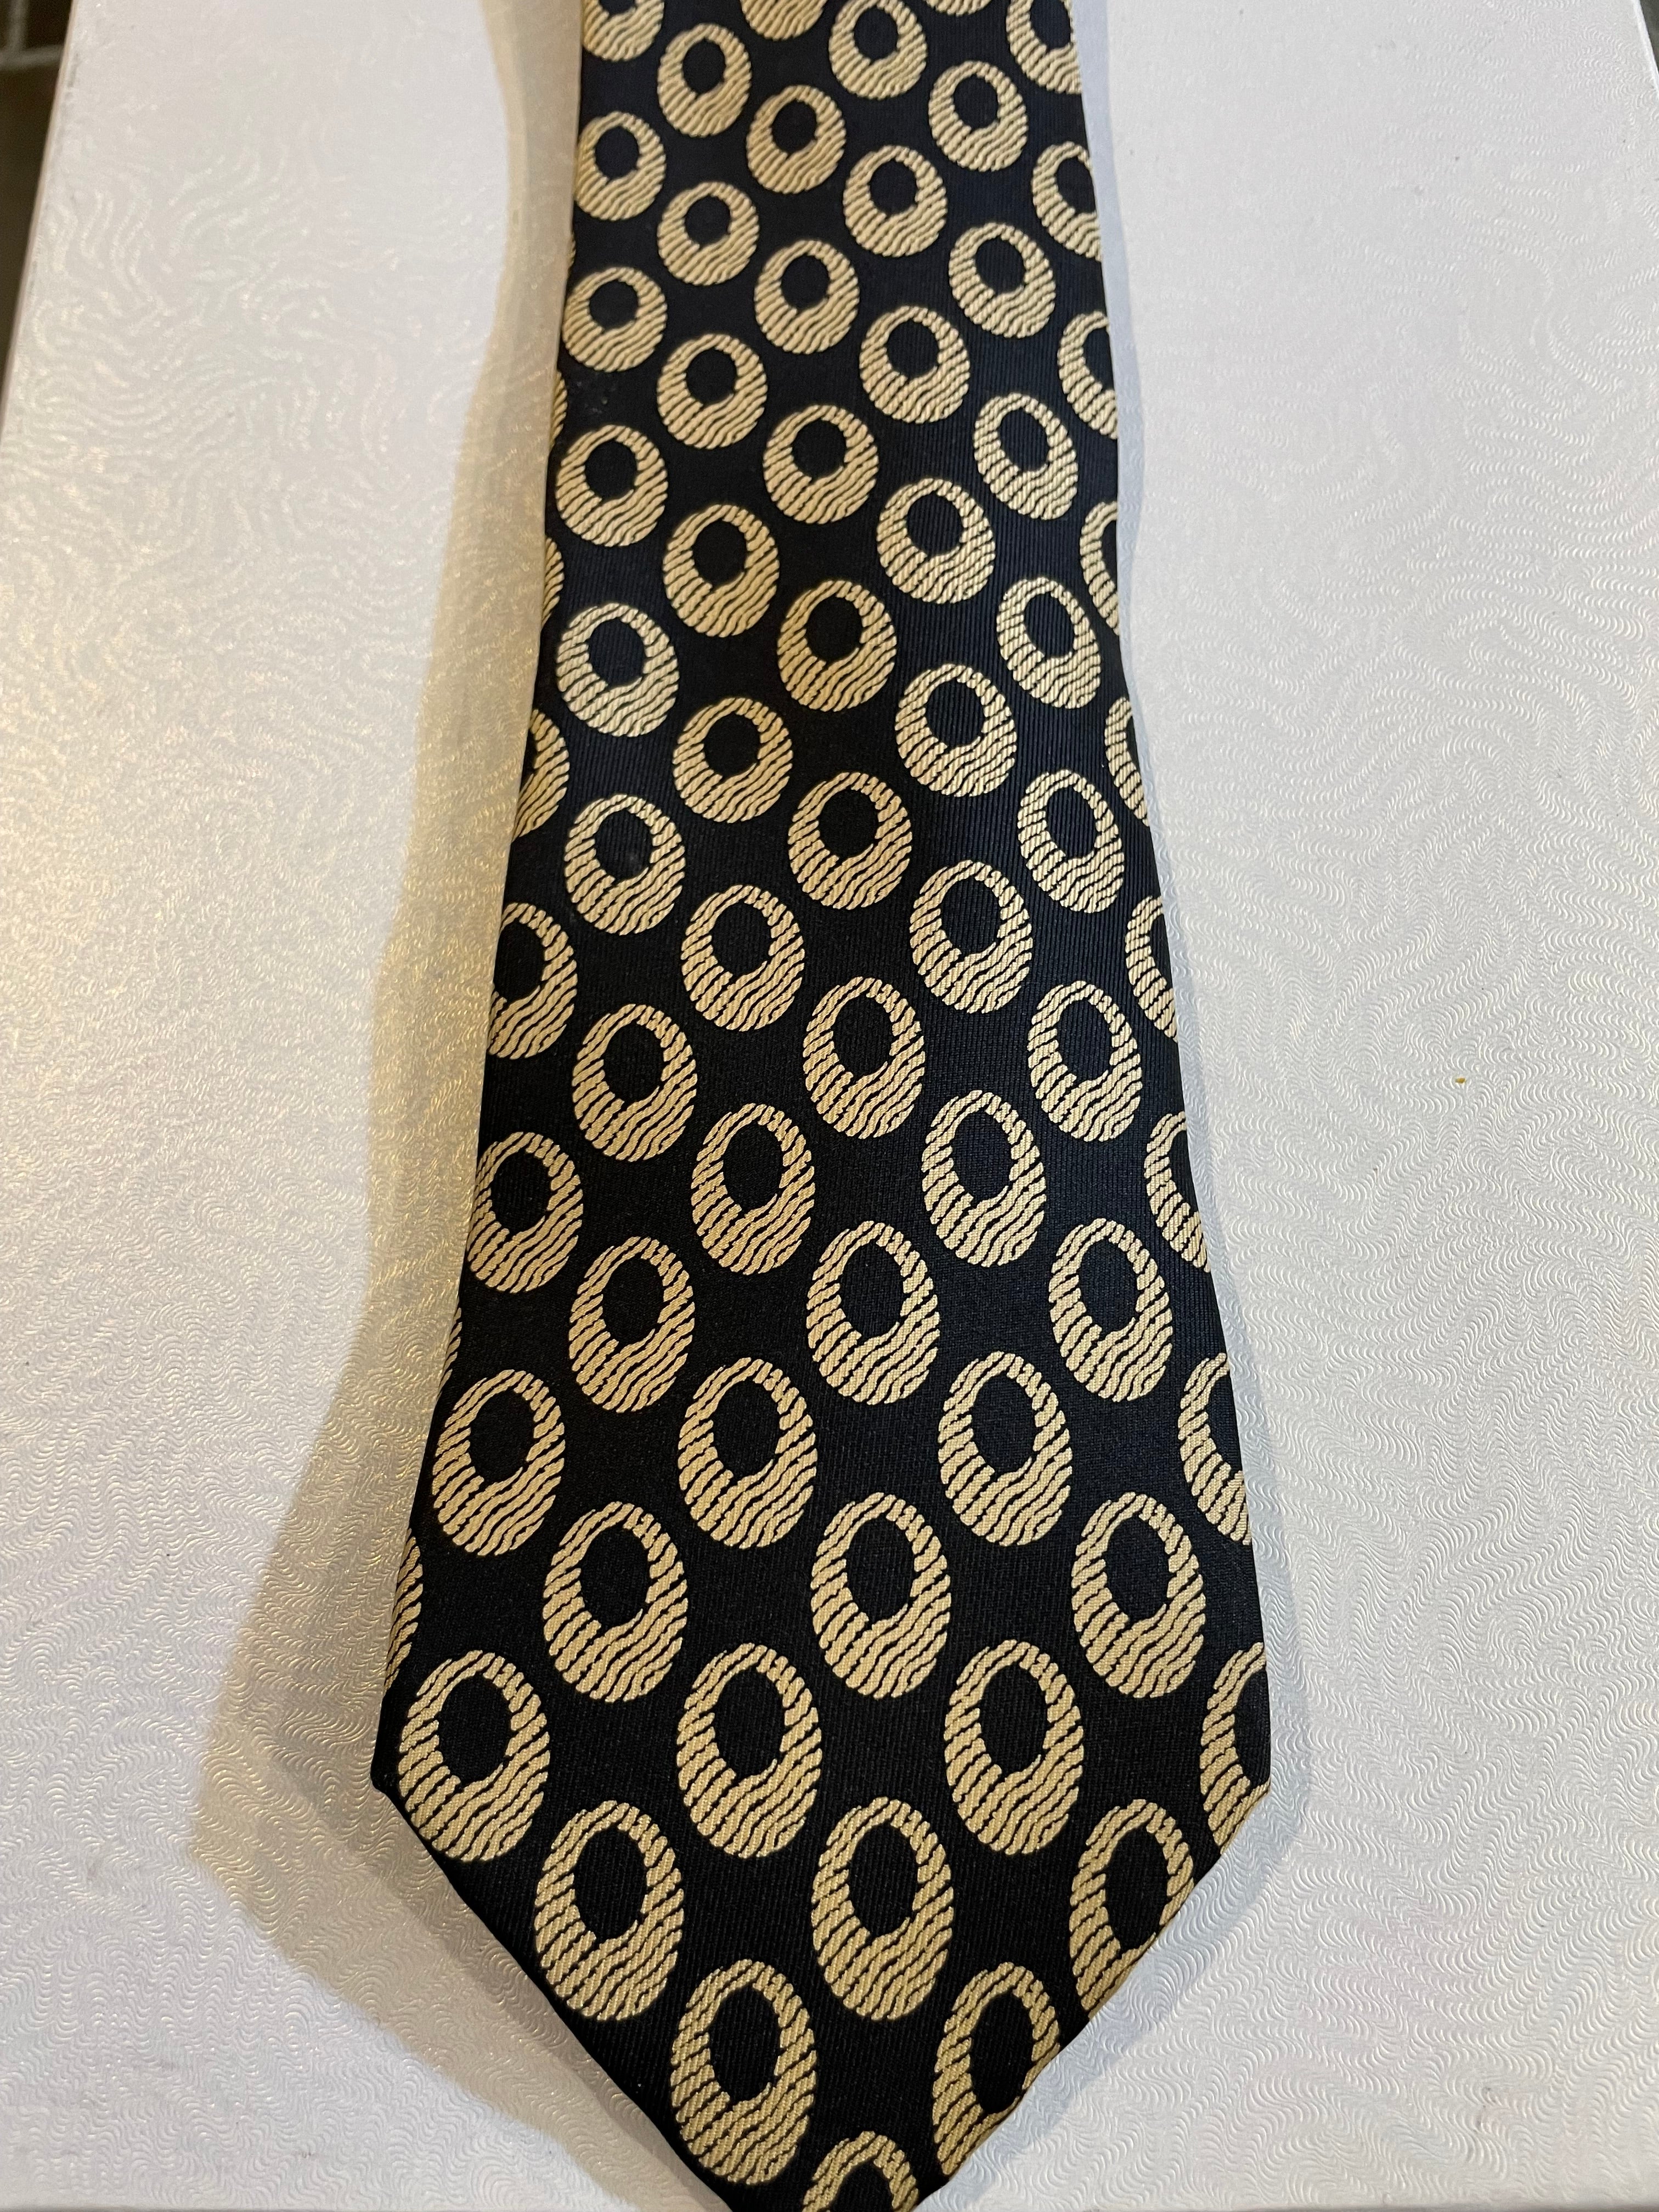 Vintage Valentino Men's Necktie  Gold ovals on black background Men's Cravatte Perfect Gift for Birthday or Fathers Day